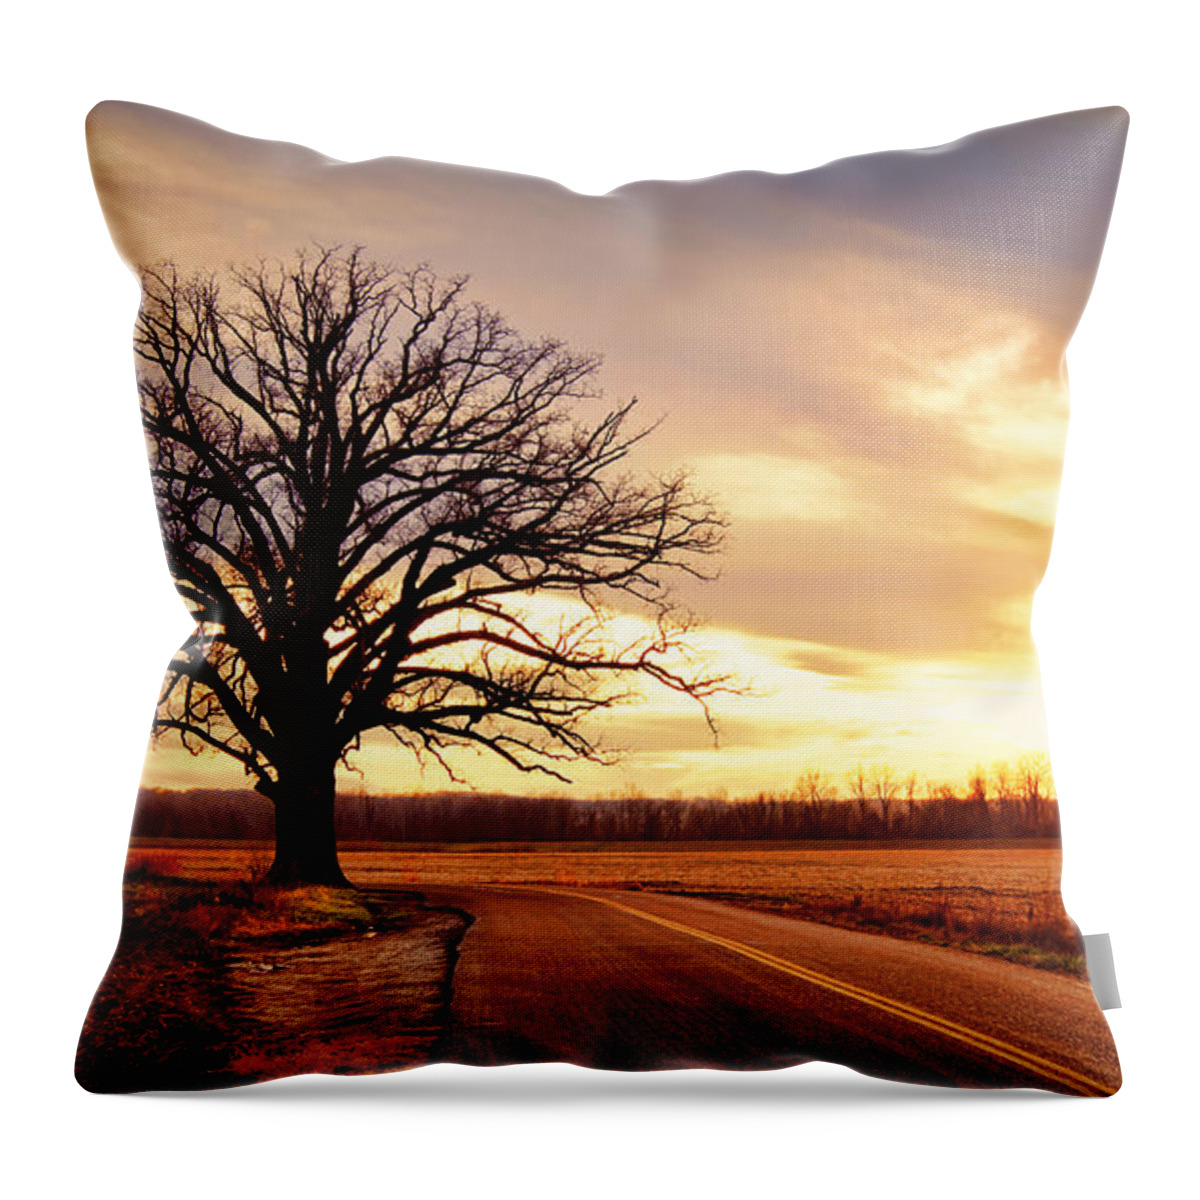 Old Throw Pillow featuring the photograph Burr Oak Silhouette by Cricket Hackmann